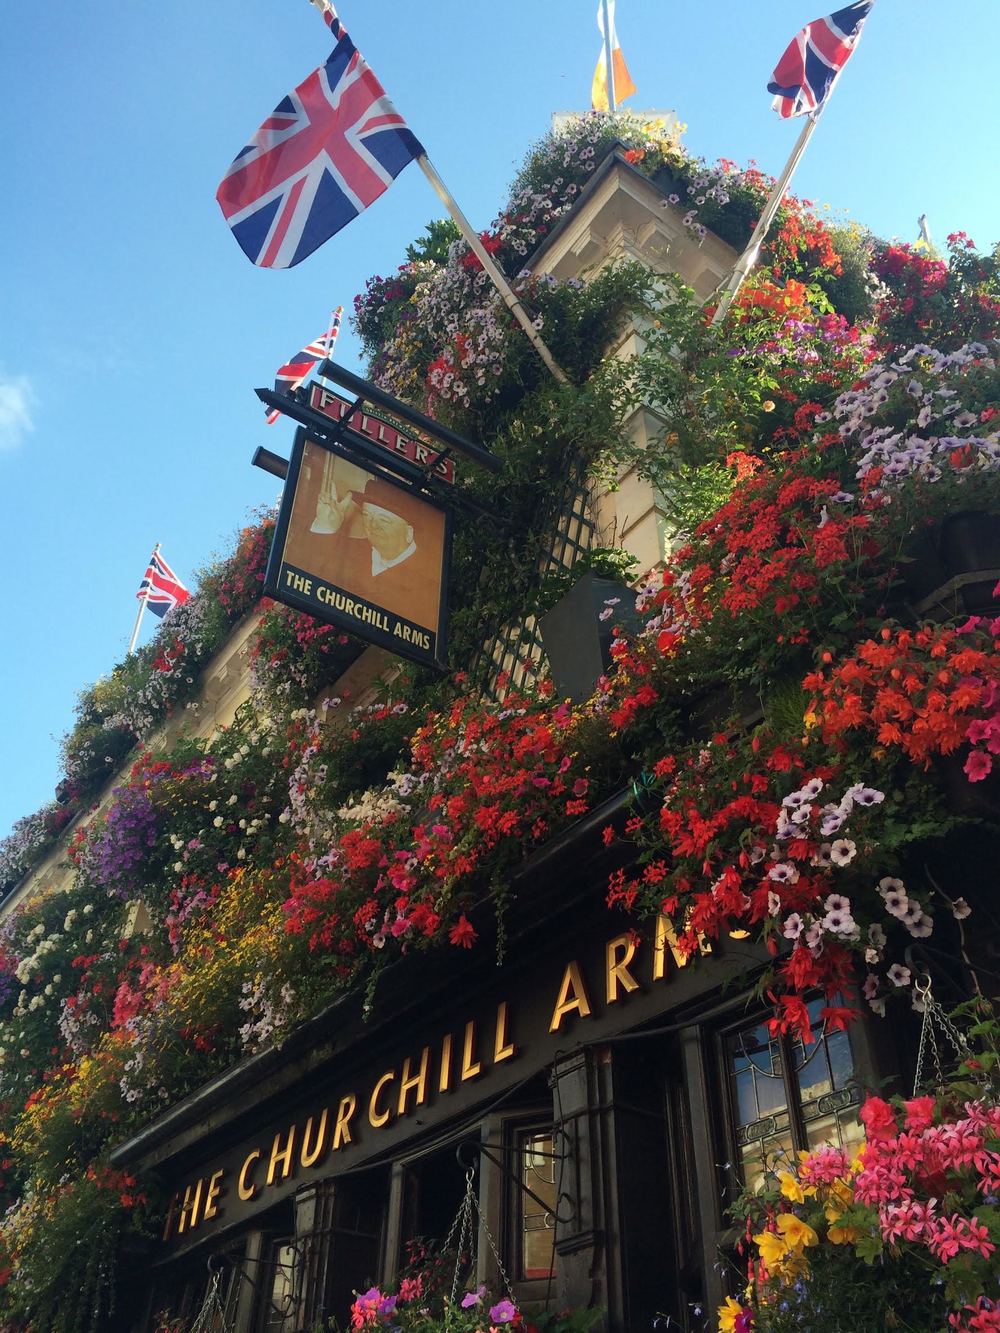  A contemporary capture - The Churchill Arms pub, situated near Notting Hill. Takes two hours to water all the plants inside &amp; out of the place.&nbsp;  Photo by Celene Barrera 